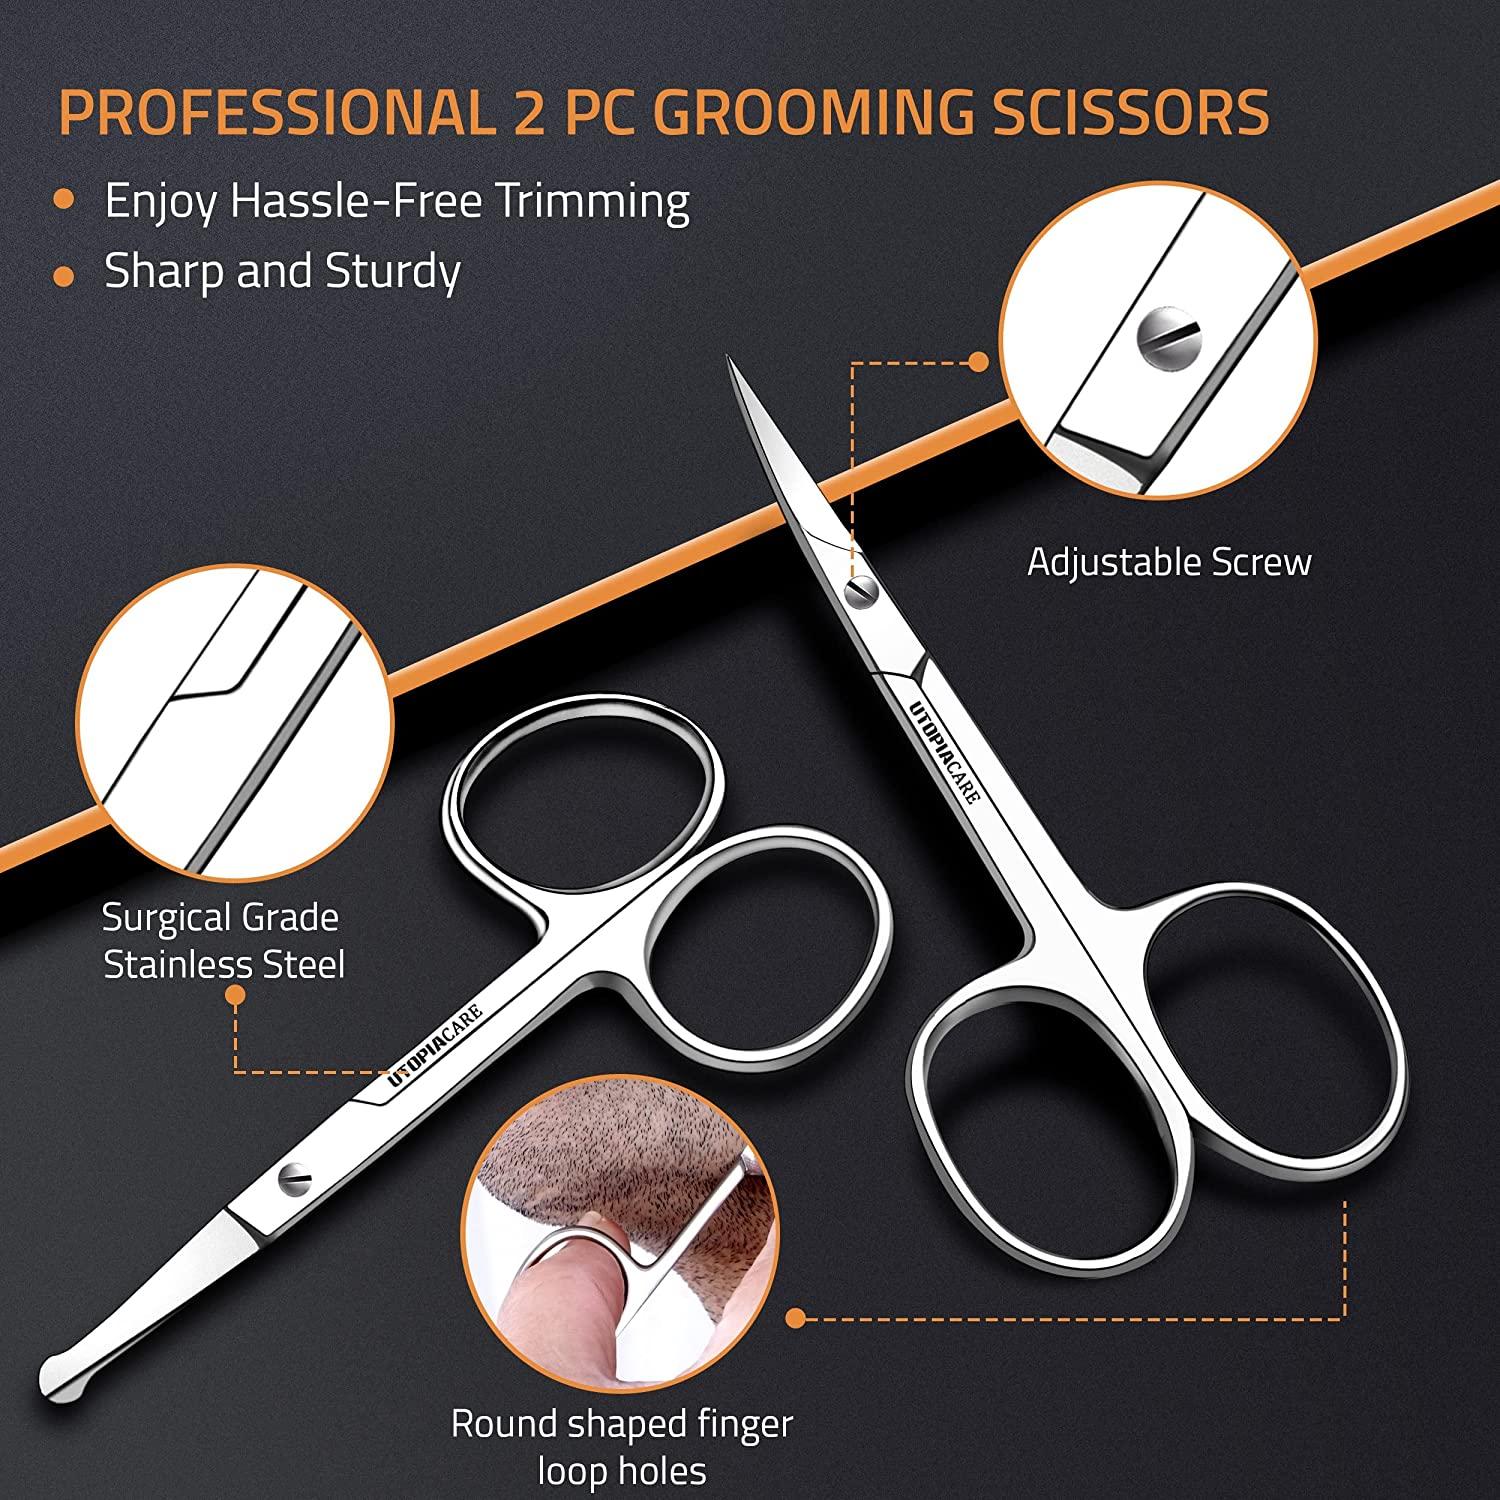 LIVINGO 3.75 Premium Nose Hair Scissors, Curved Safety Blades with Rounded  Tip for Trimming Small Details Facial Hair, Ear Hair, Eyebrow (Black)